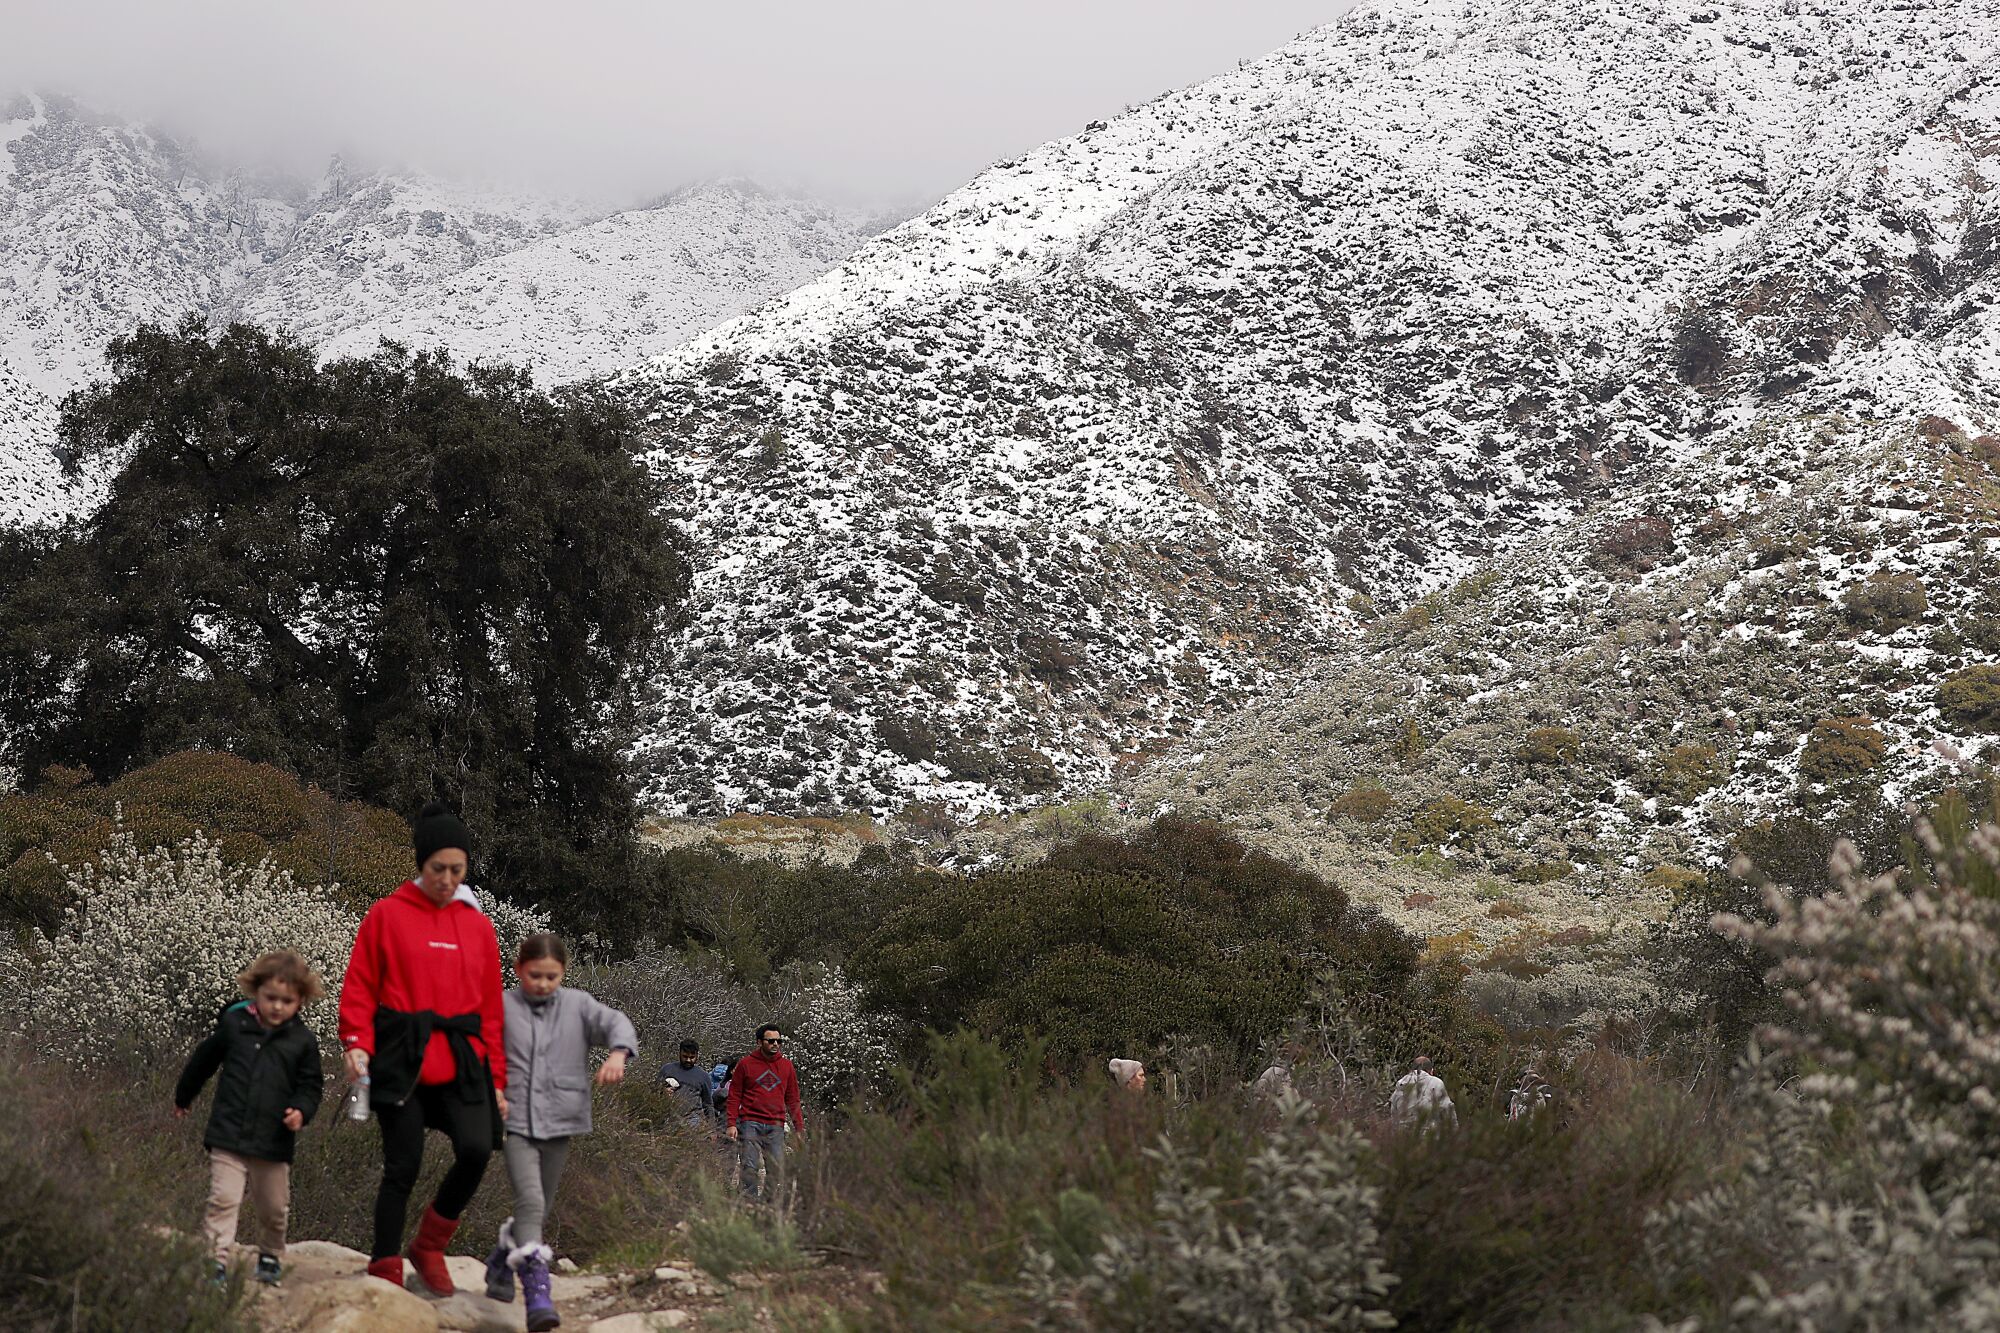 Hikers get a close look at mountains covered in snow at Deukmejian Wilderness Park in Glendale on Feb. 26.